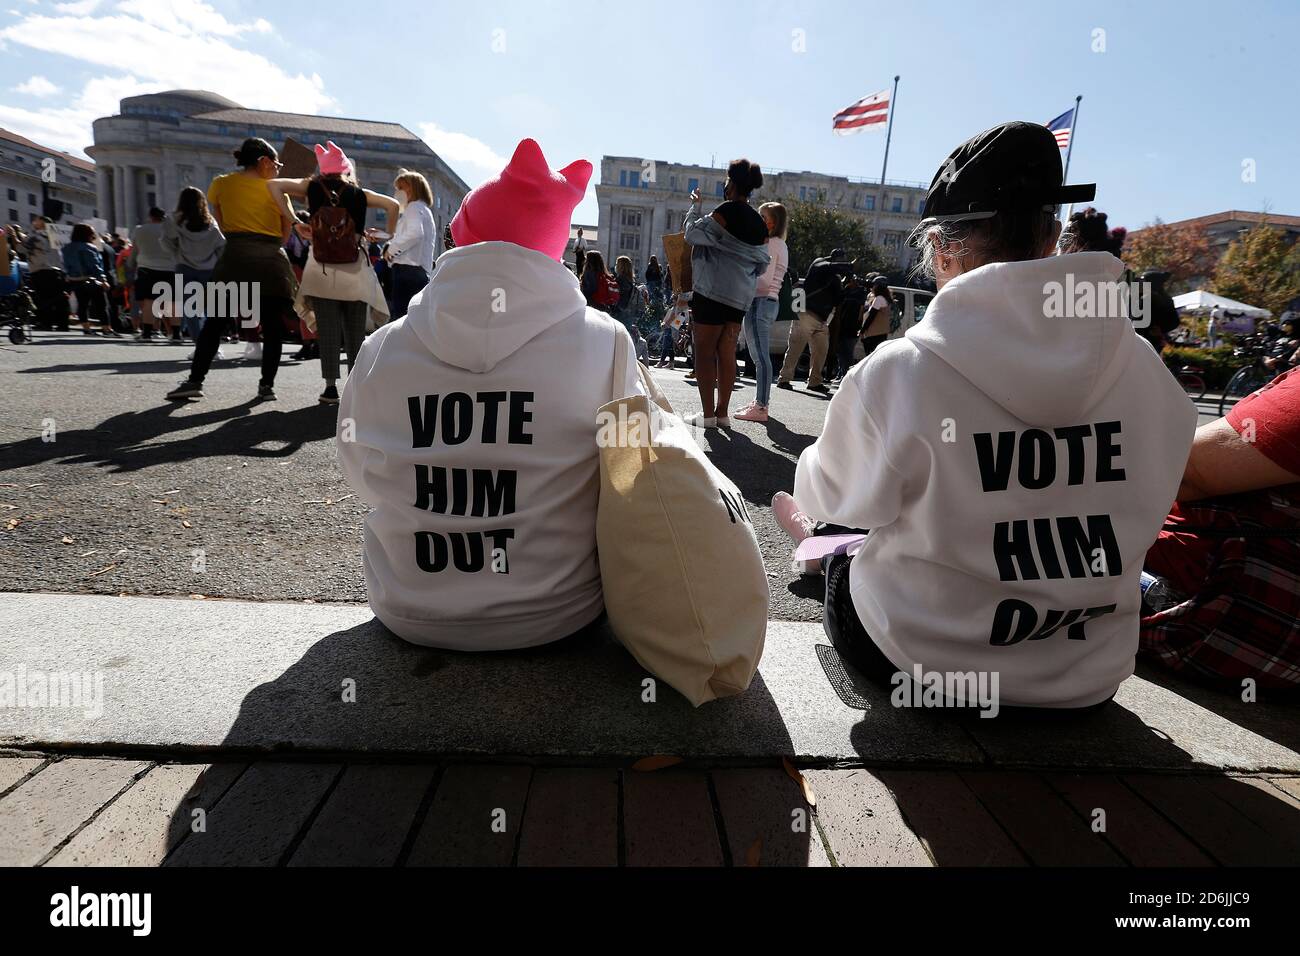 Demonstrators listen to speakers raising issues about voting rights and calling on Congress to suspend the Supreme Court confirmation process in Freedom Plaza on October 17, 2020 in Washington DC.Radical leftist demonstrators opposing the confirmation of Amy Cony Barrett to the Supreme Court and the reelection of President Trump, confront conservative women in front of the Supreme Court. As a counter protest, various right-wing women's groups intend on sending a message that they do not speak for all women. (Photo by John Lamparski/SIPA USA) Stock Photo